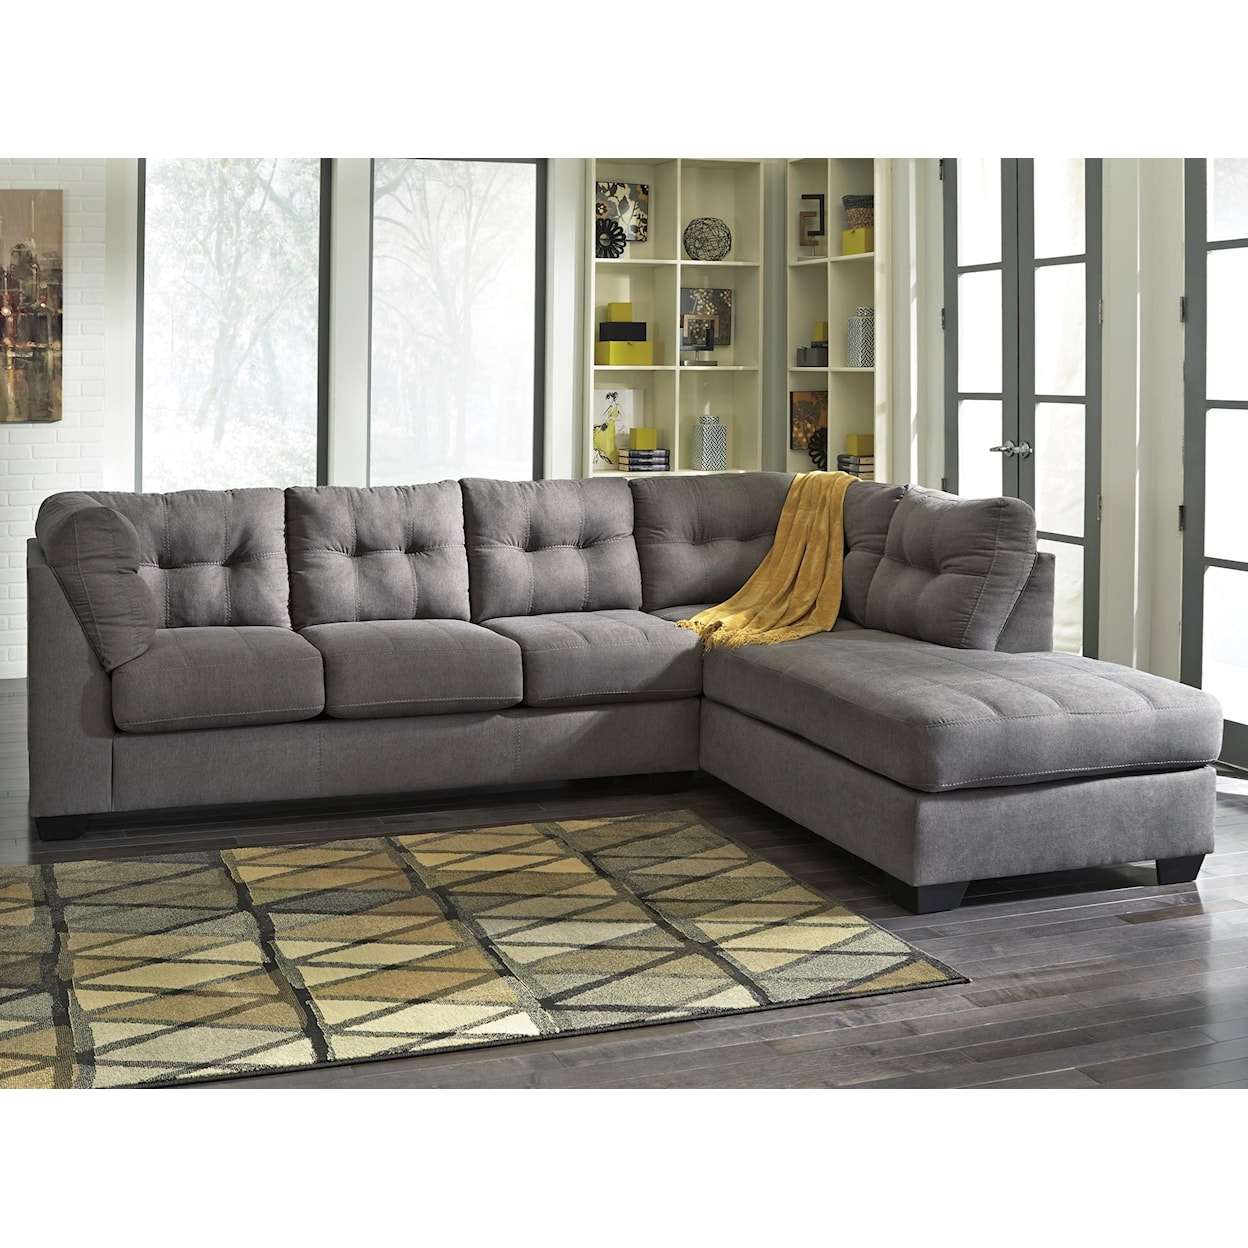 Ashley Furniture Benchcraft Maier 2-Piece Sleeper Sectional with Chaise